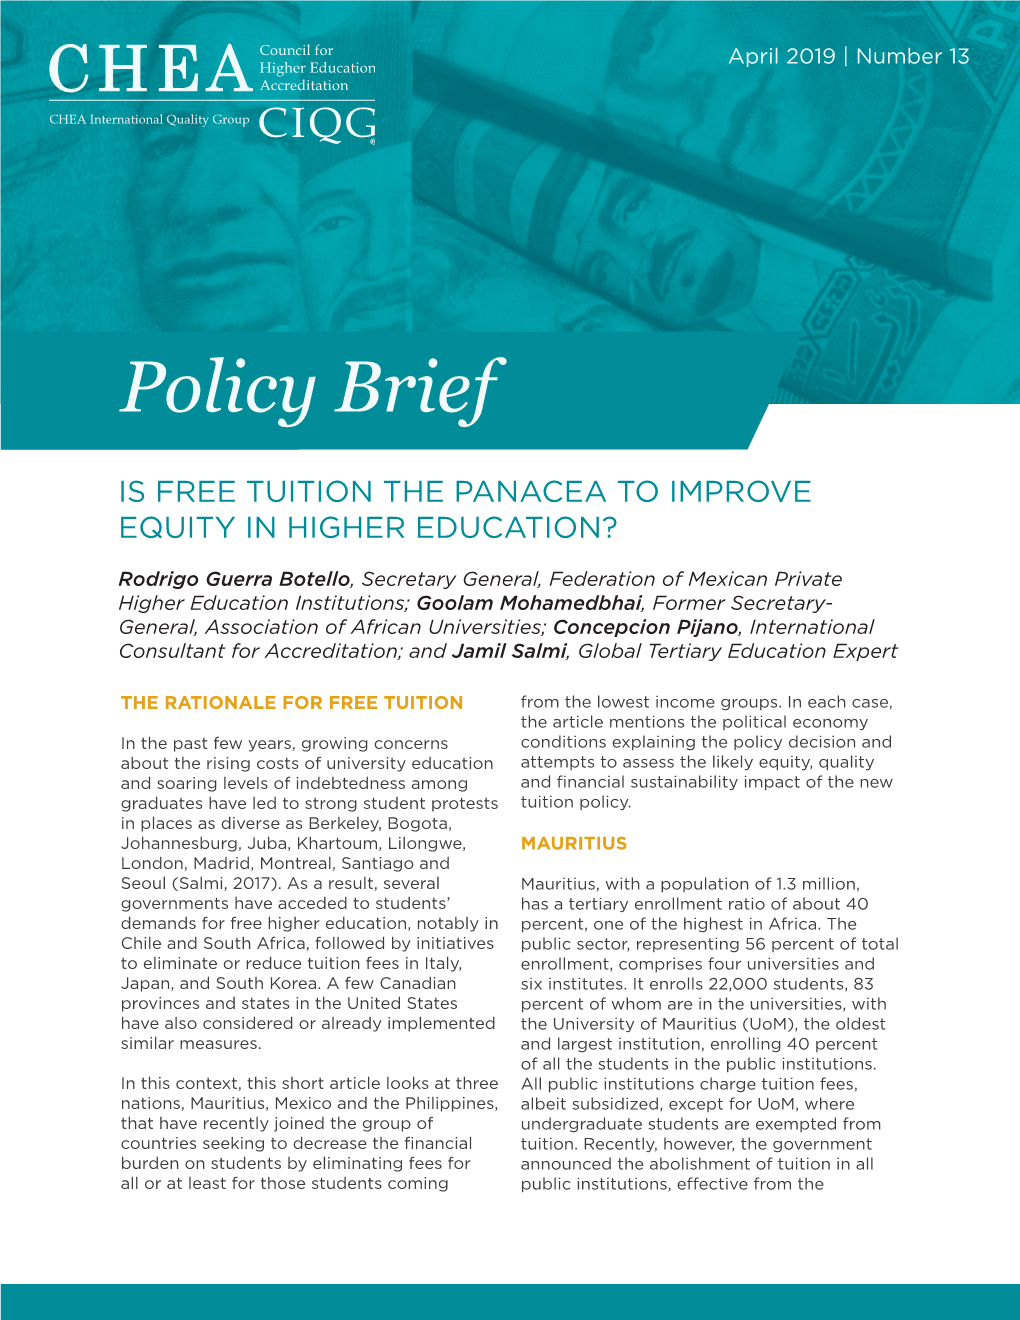 Policy Brief #13: Is Free Tuition the Panacea To